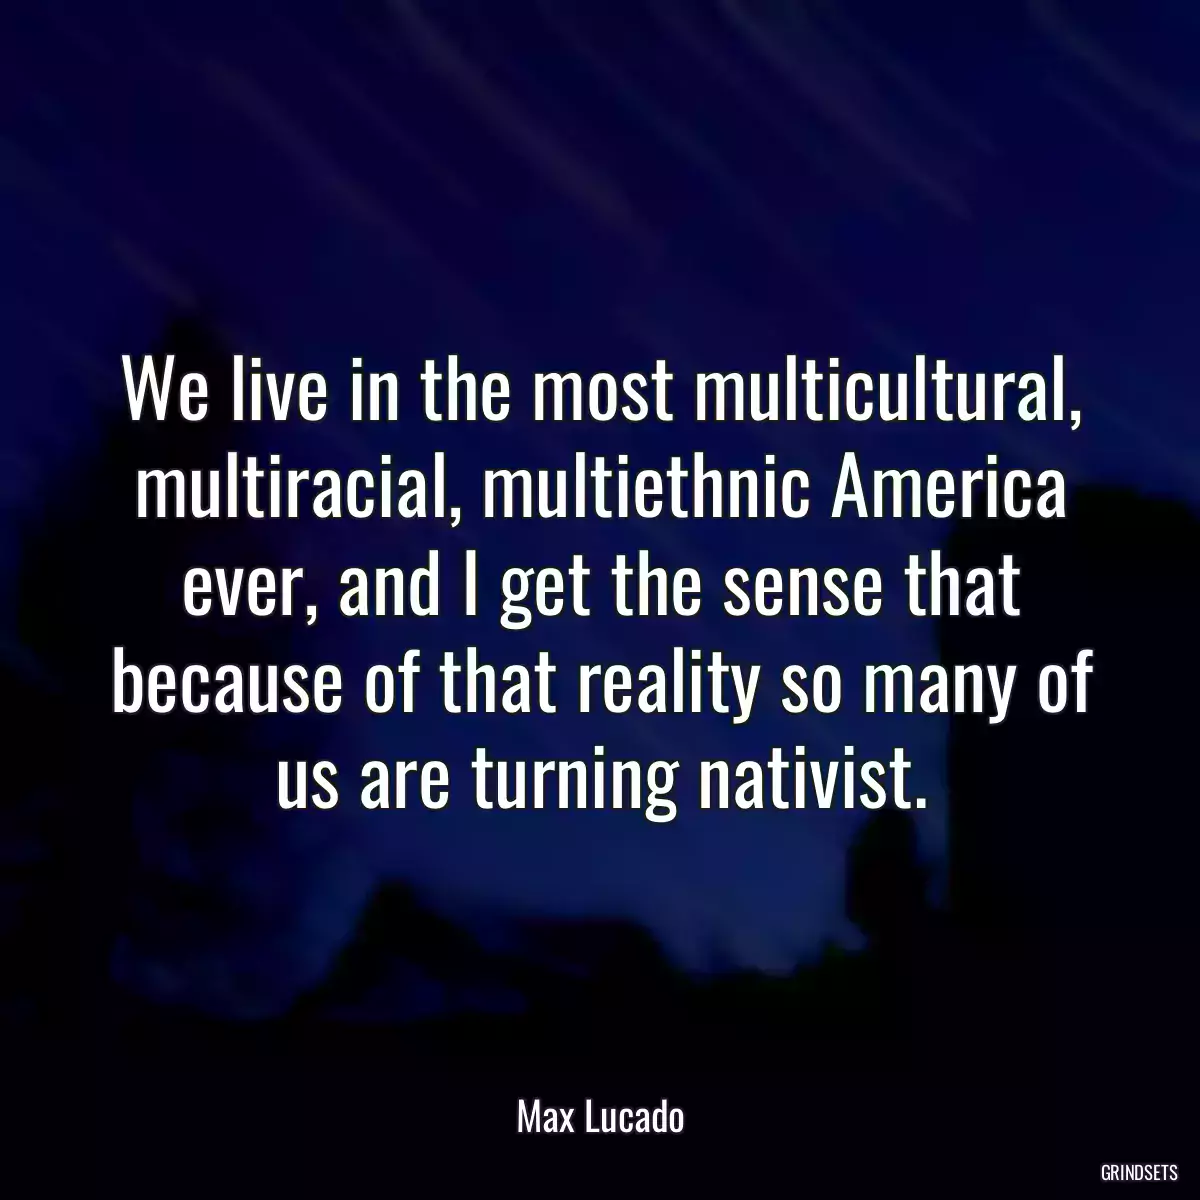 We live in the most multicultural, multiracial, multiethnic America ever, and I get the sense that because of that reality so many of us are turning nativist.